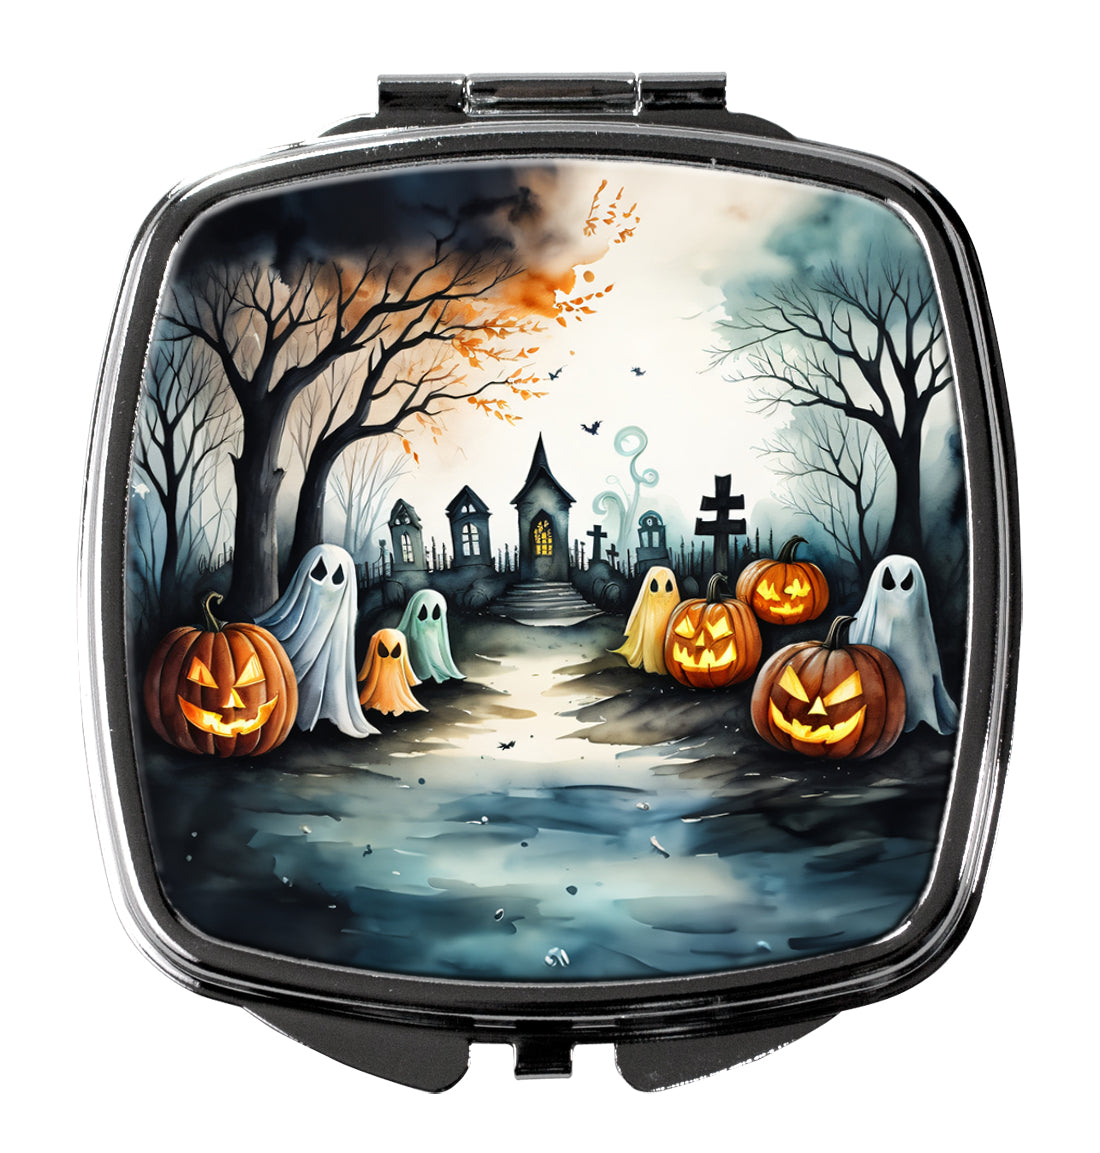 Buy this Ghosts Spooky Halloween Compact Mirror